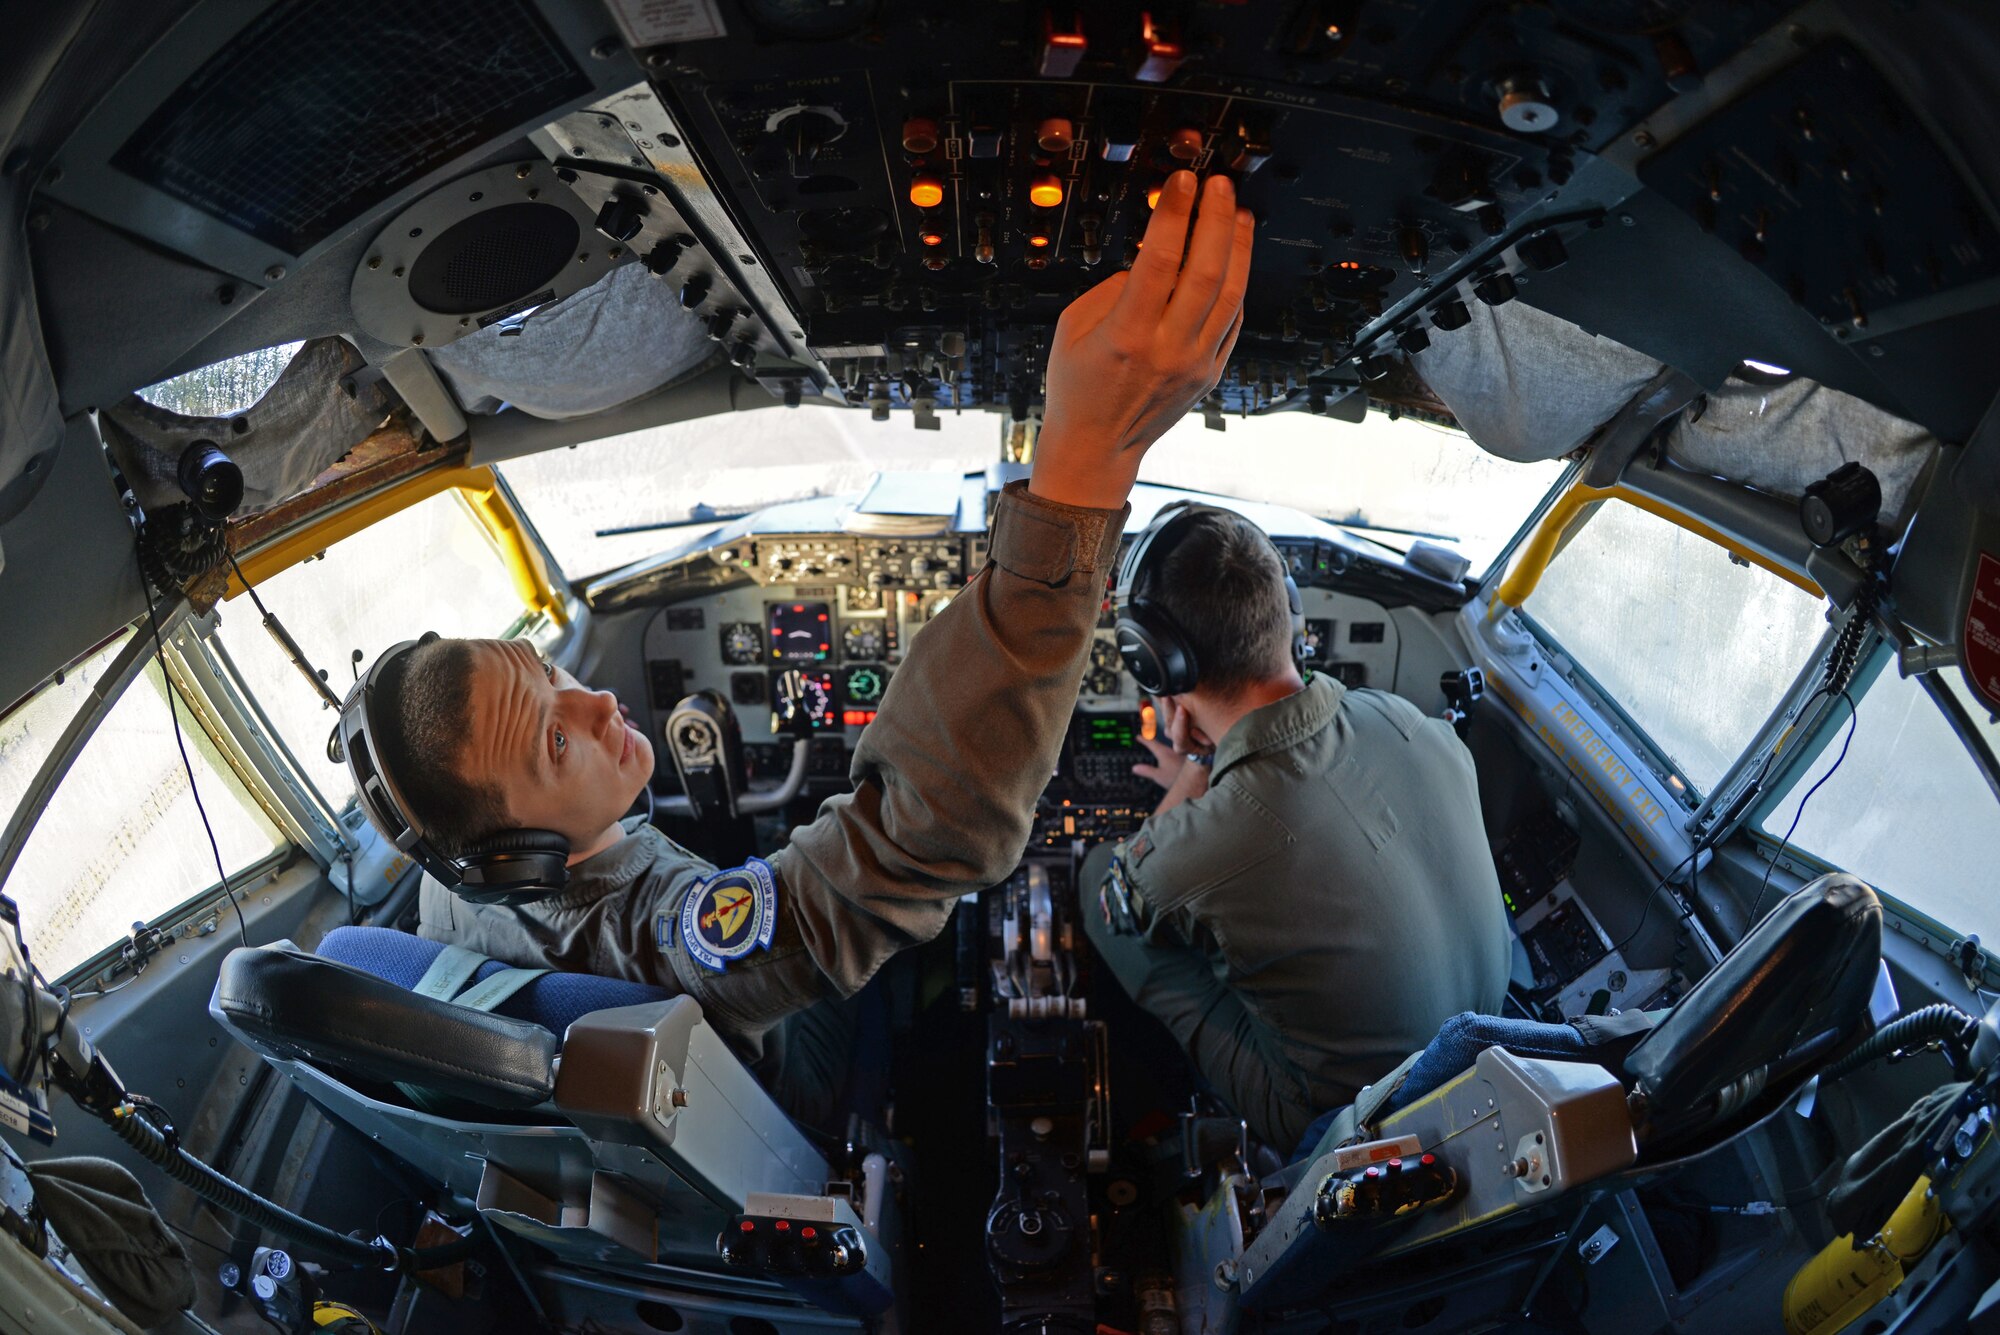 U.S. Air Force Capt. Ryan Nelson, left, and Maj. Matthew Boatman, 351st Air Refueling Squadron pilots, conduct pre-flight checks of a KC-135 Stratotanker prior to performing an air-refueling mission, at RAF Mildenhall, England, Sept. 15, 2018. The mission included the refueling of a B-52 Stratofortress from the 307th Bomb Wing at Barksdale, Louisiana, deployed to RAF Fairford, England. (U.S. Air Force photo by Senior Airman Luke Milano)